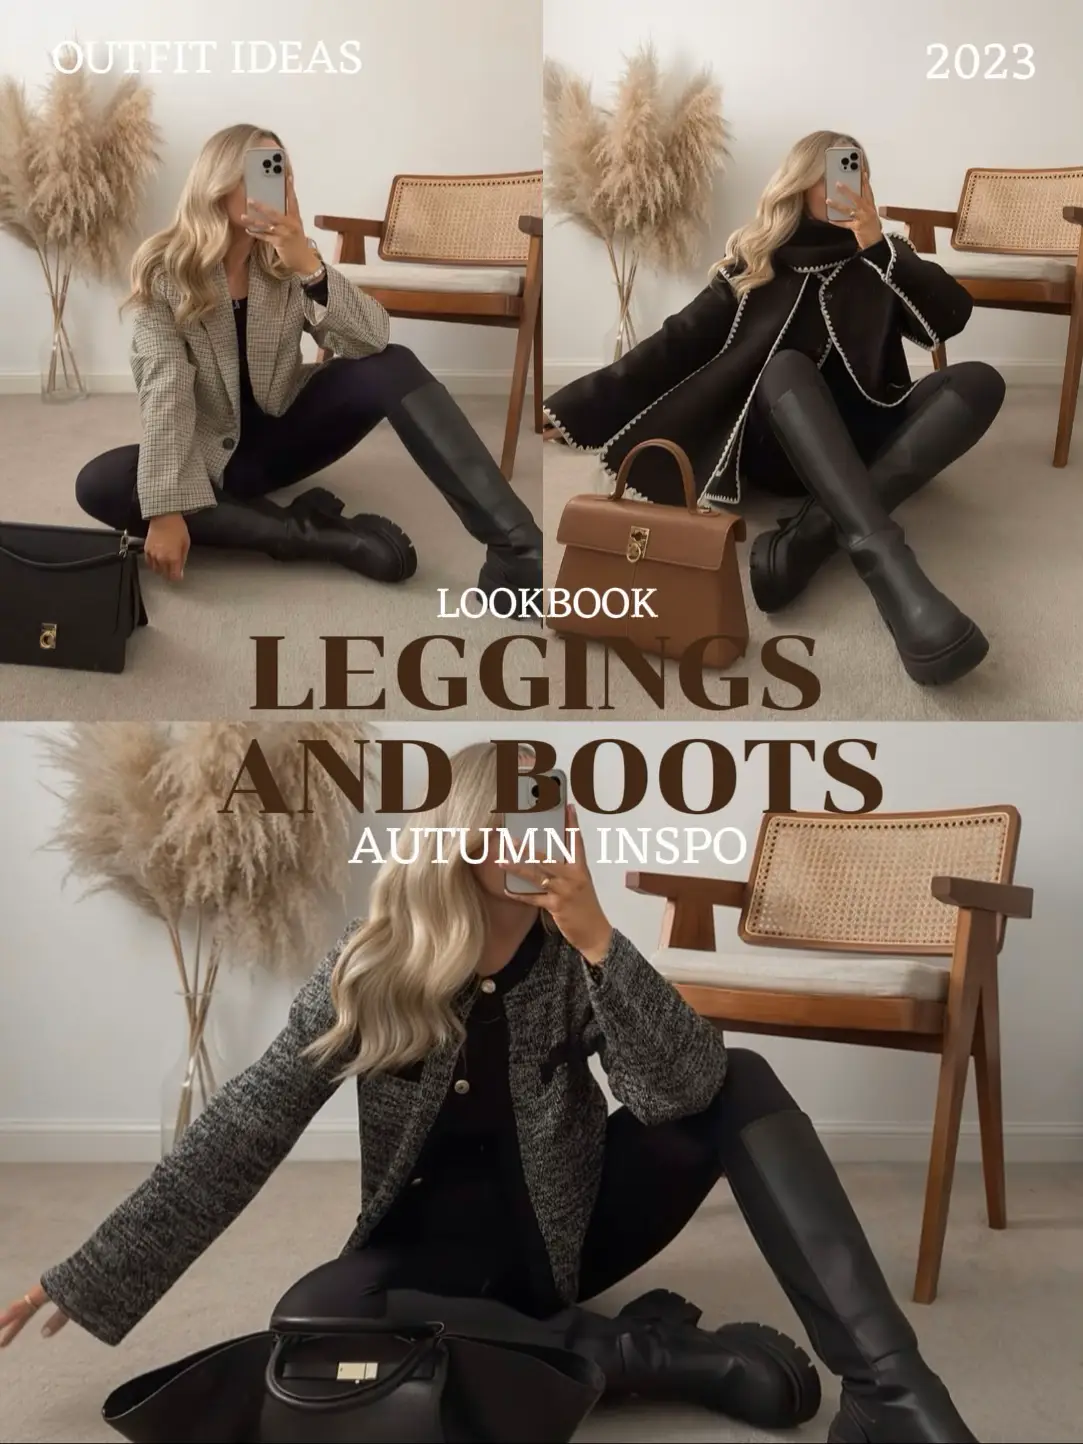 Fashionistas! — While Lululemon leggings, and Ugg boots may be the